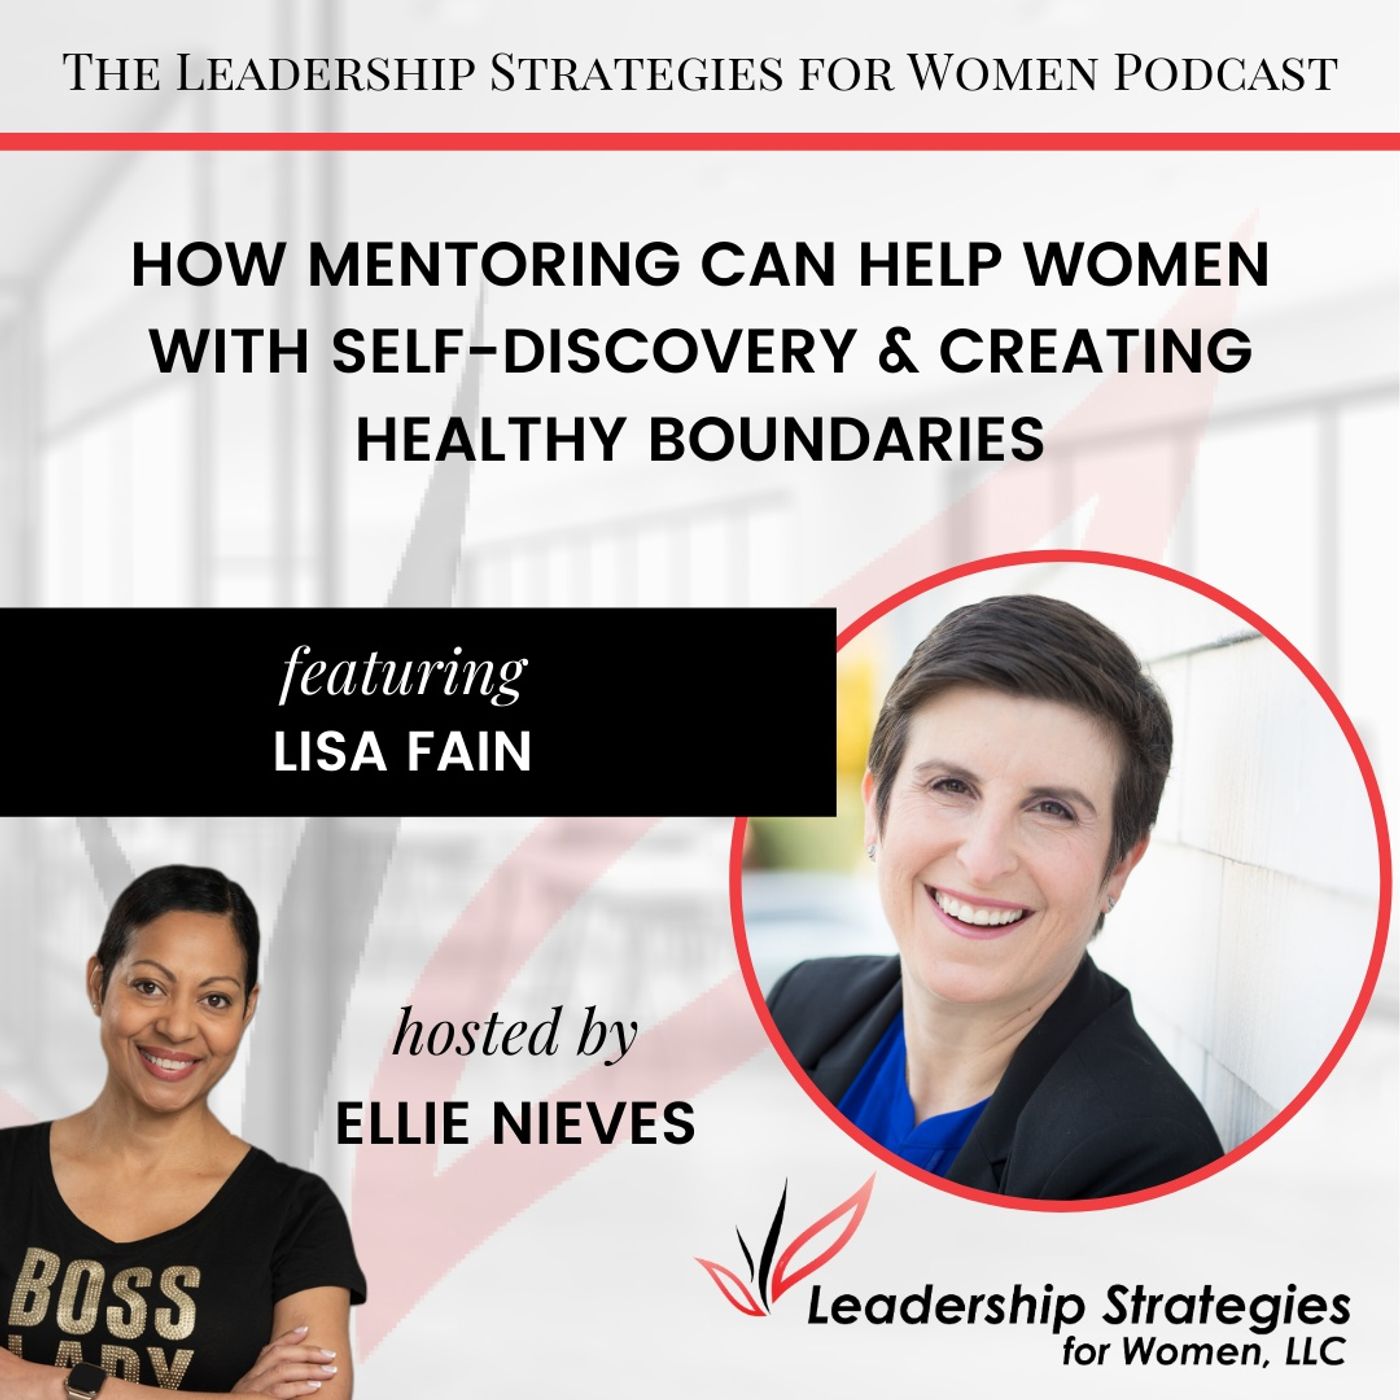 How Mentoring Can Help Women With Self-Discovery & Creating Healthy Boundaries